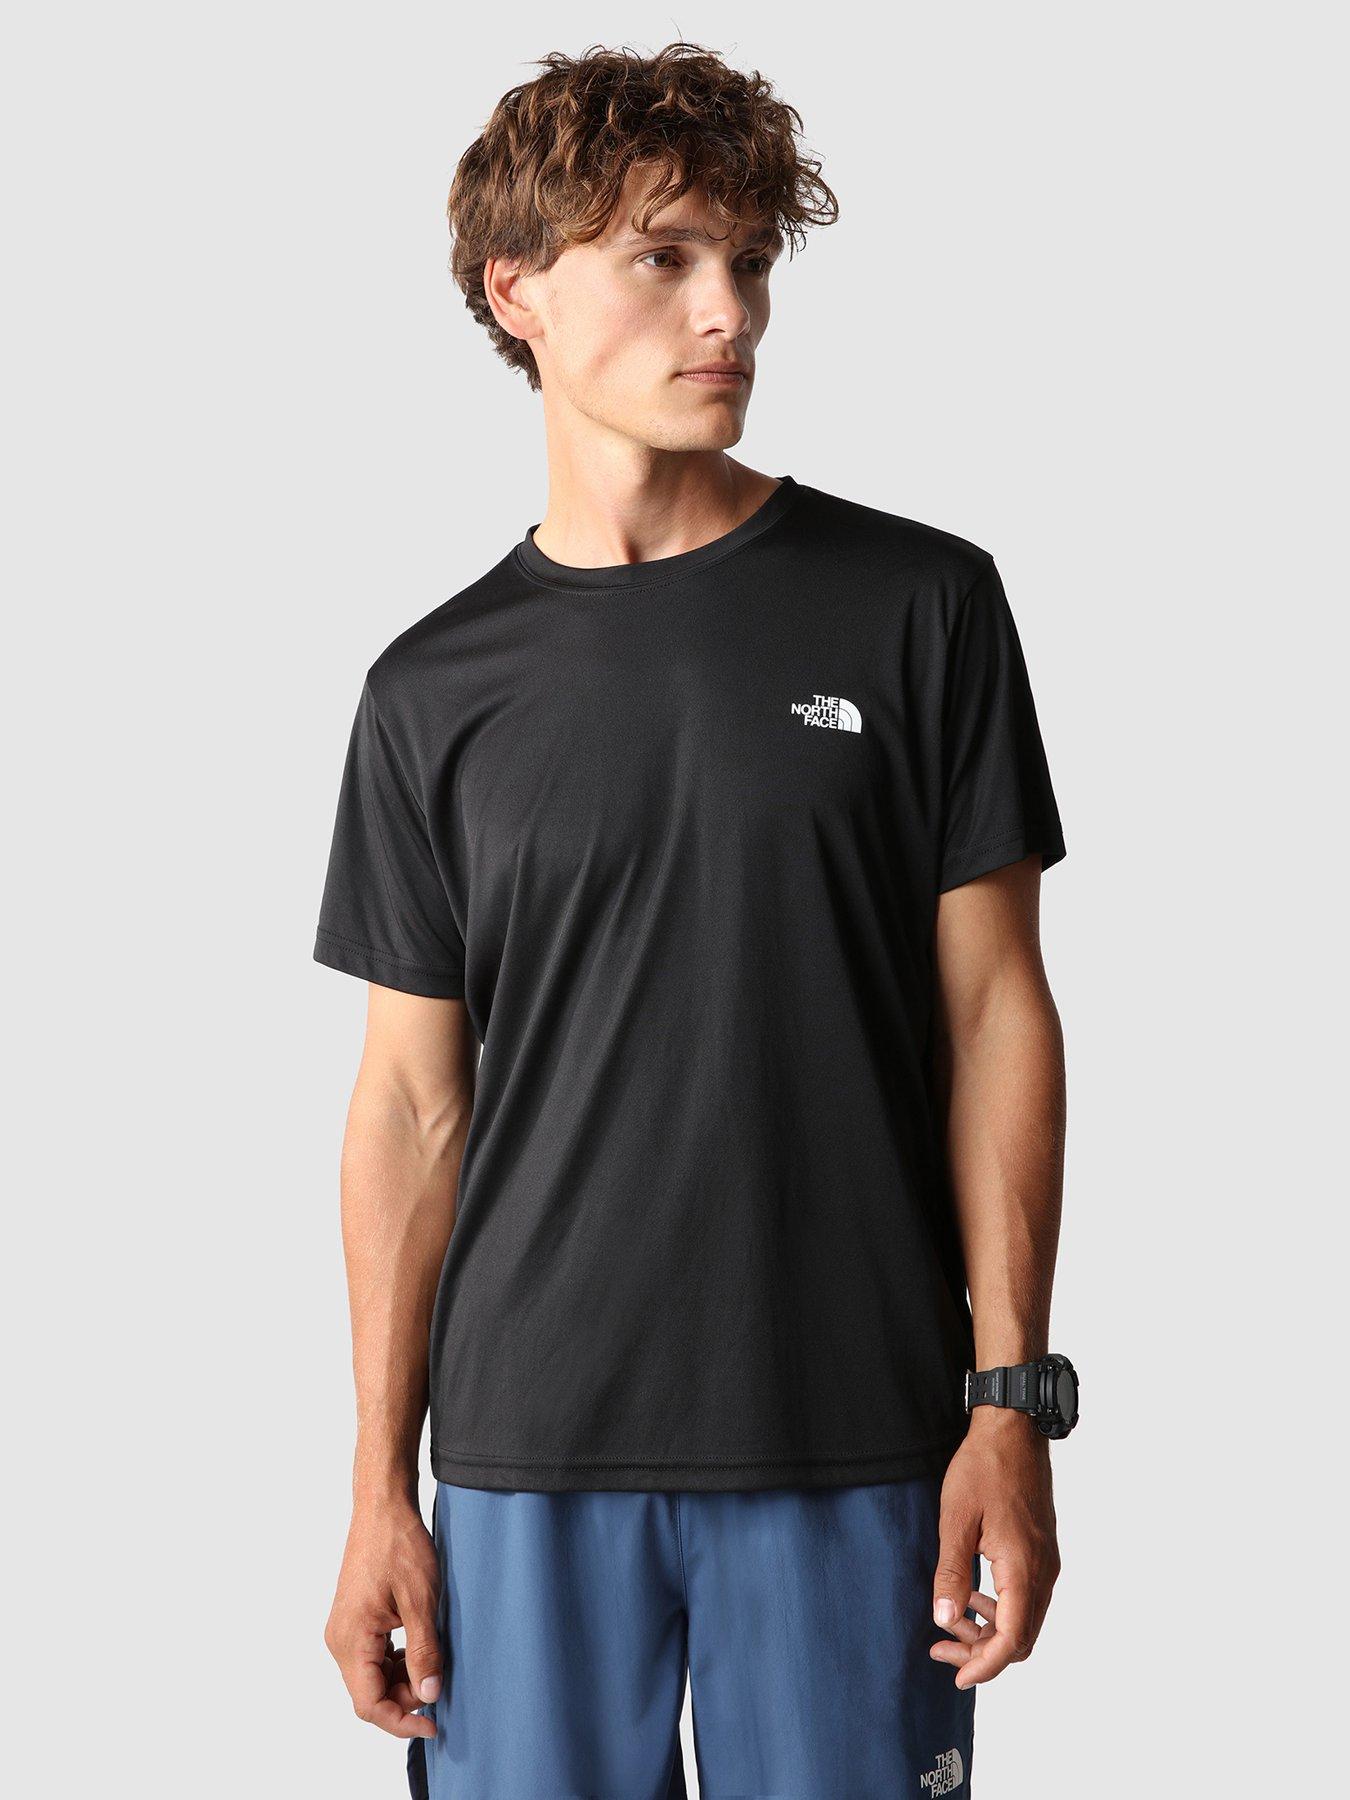 THE Amp Men\'s Black NORTH FACE Crew T-Shirt Reaxion -